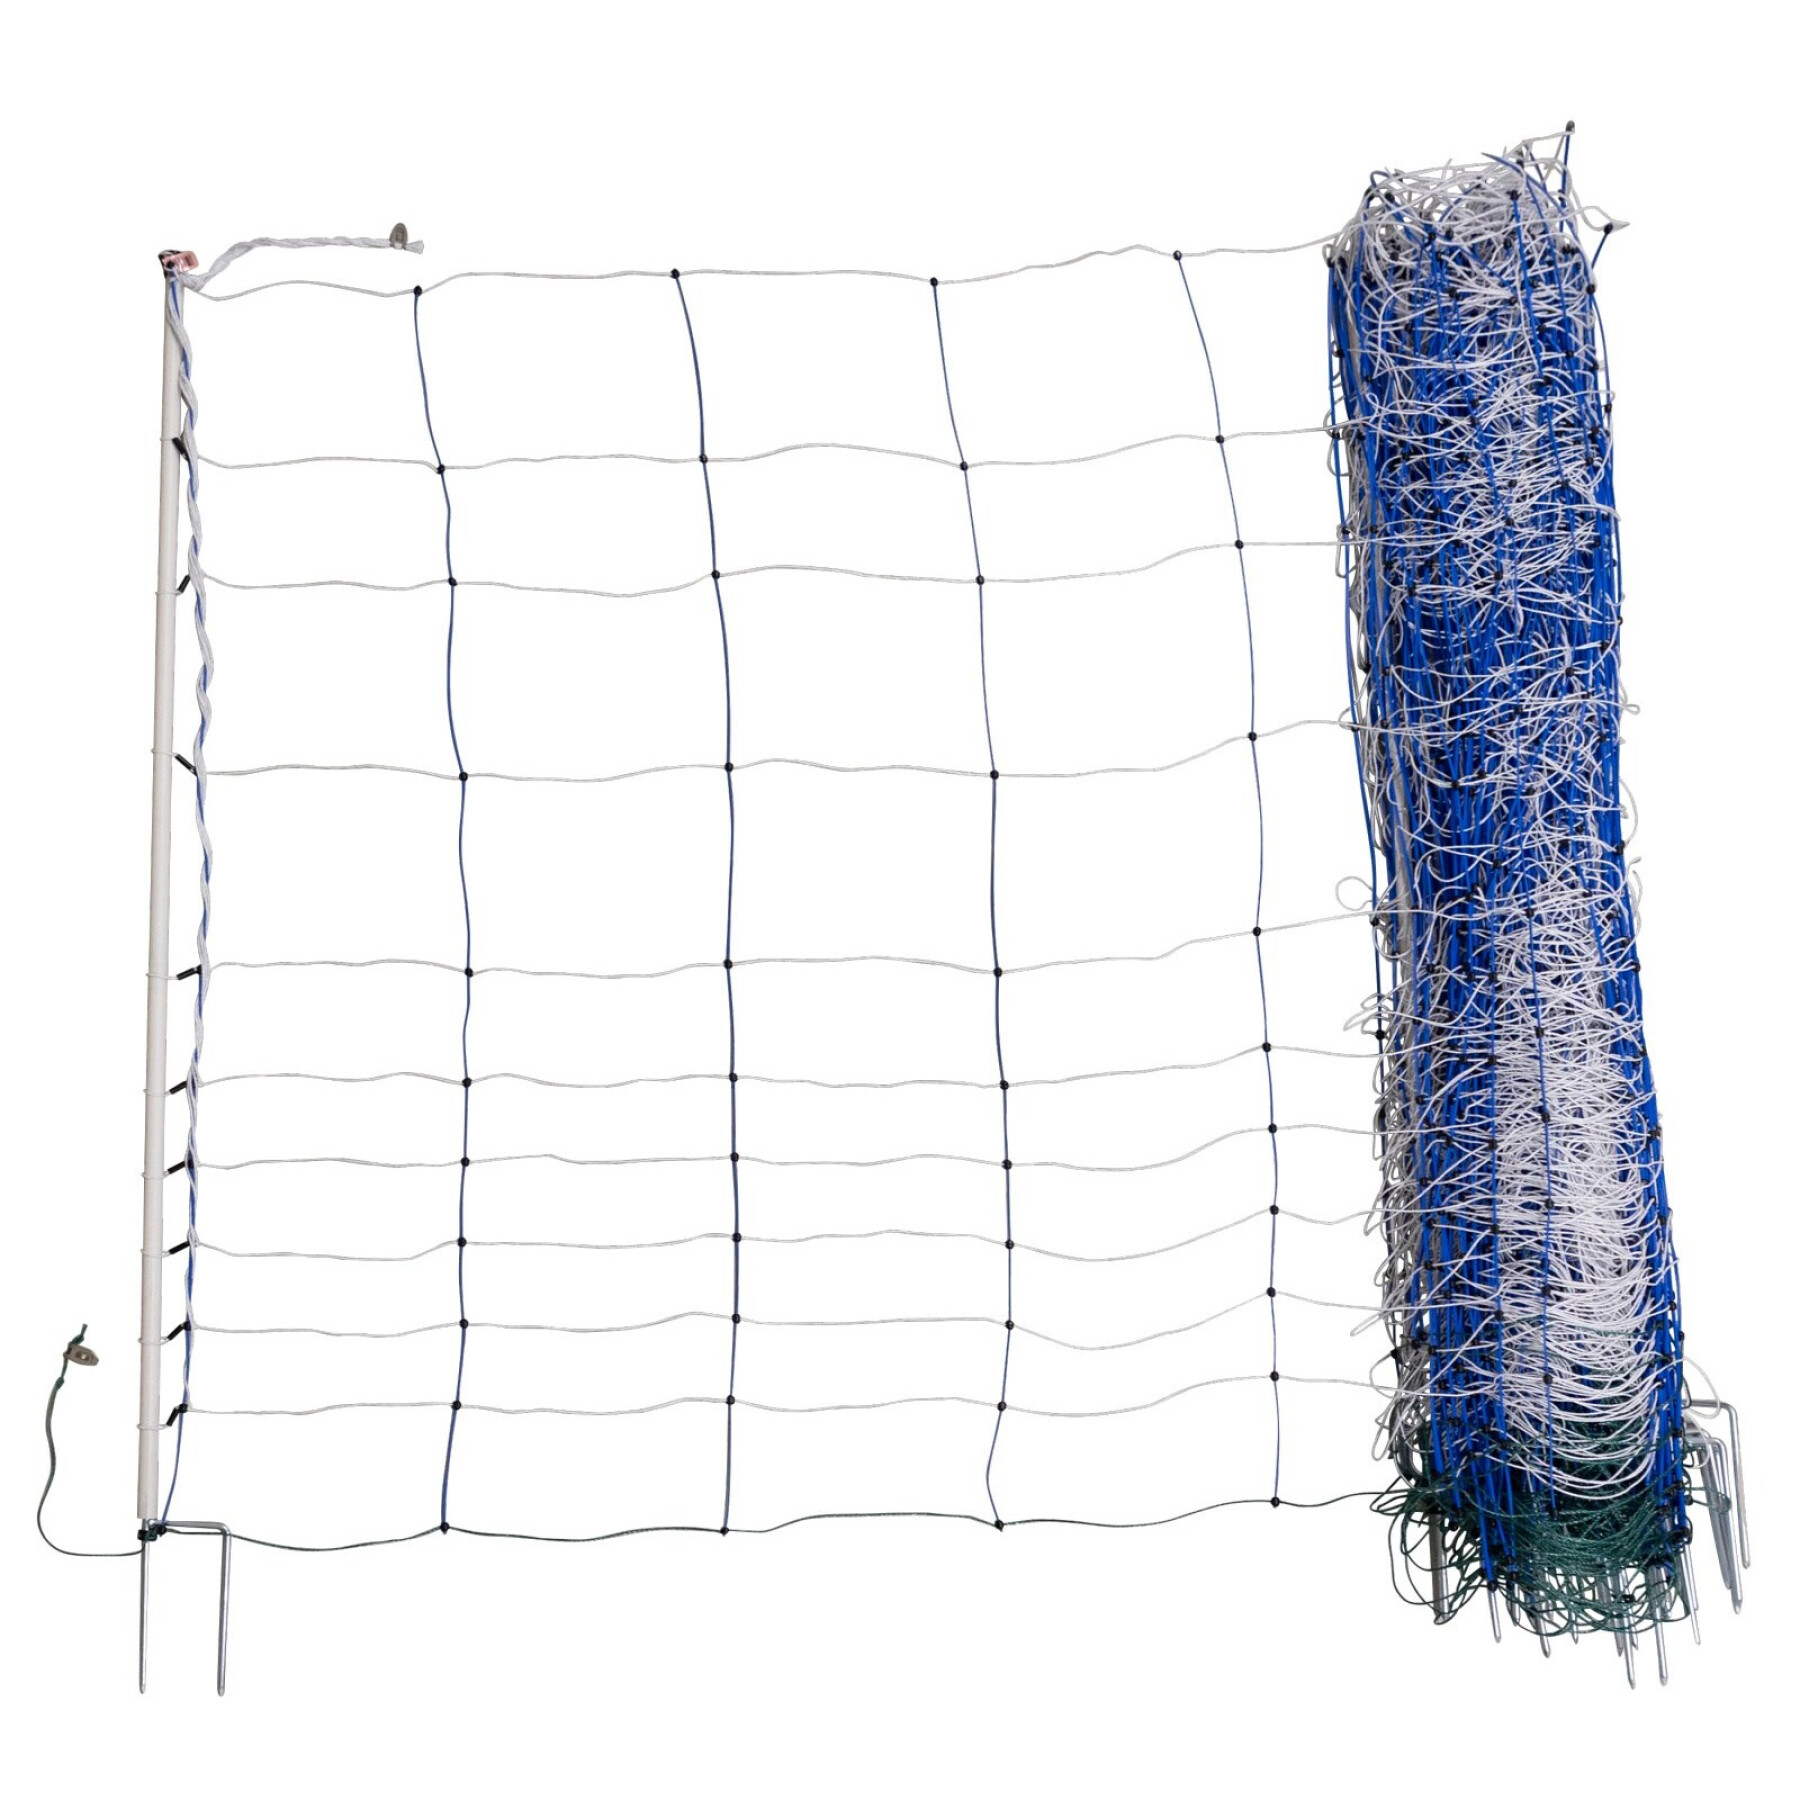 Net for double-point fence Ako TitanNet